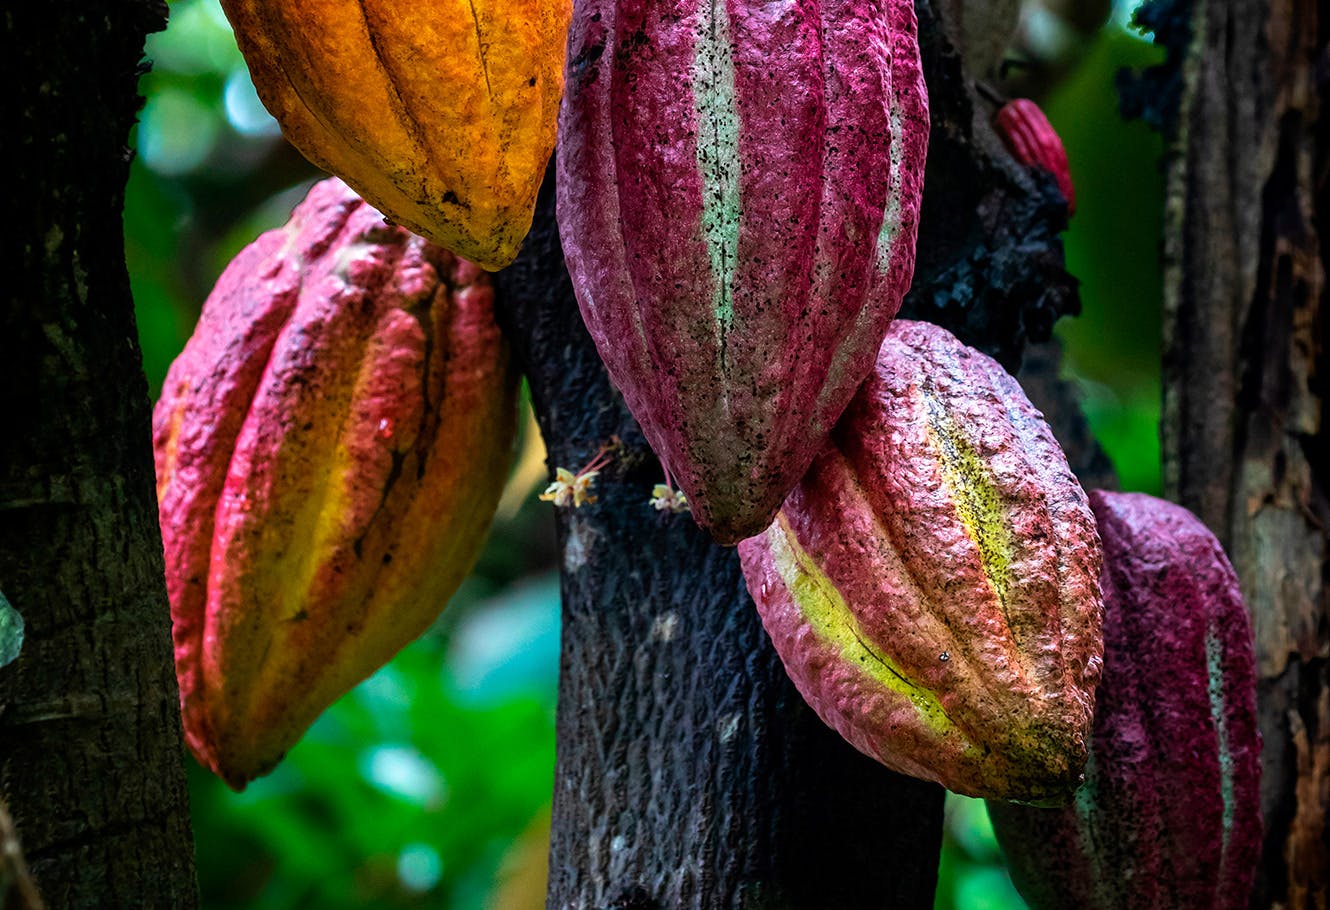 Cocoa tree also called cacao tree.